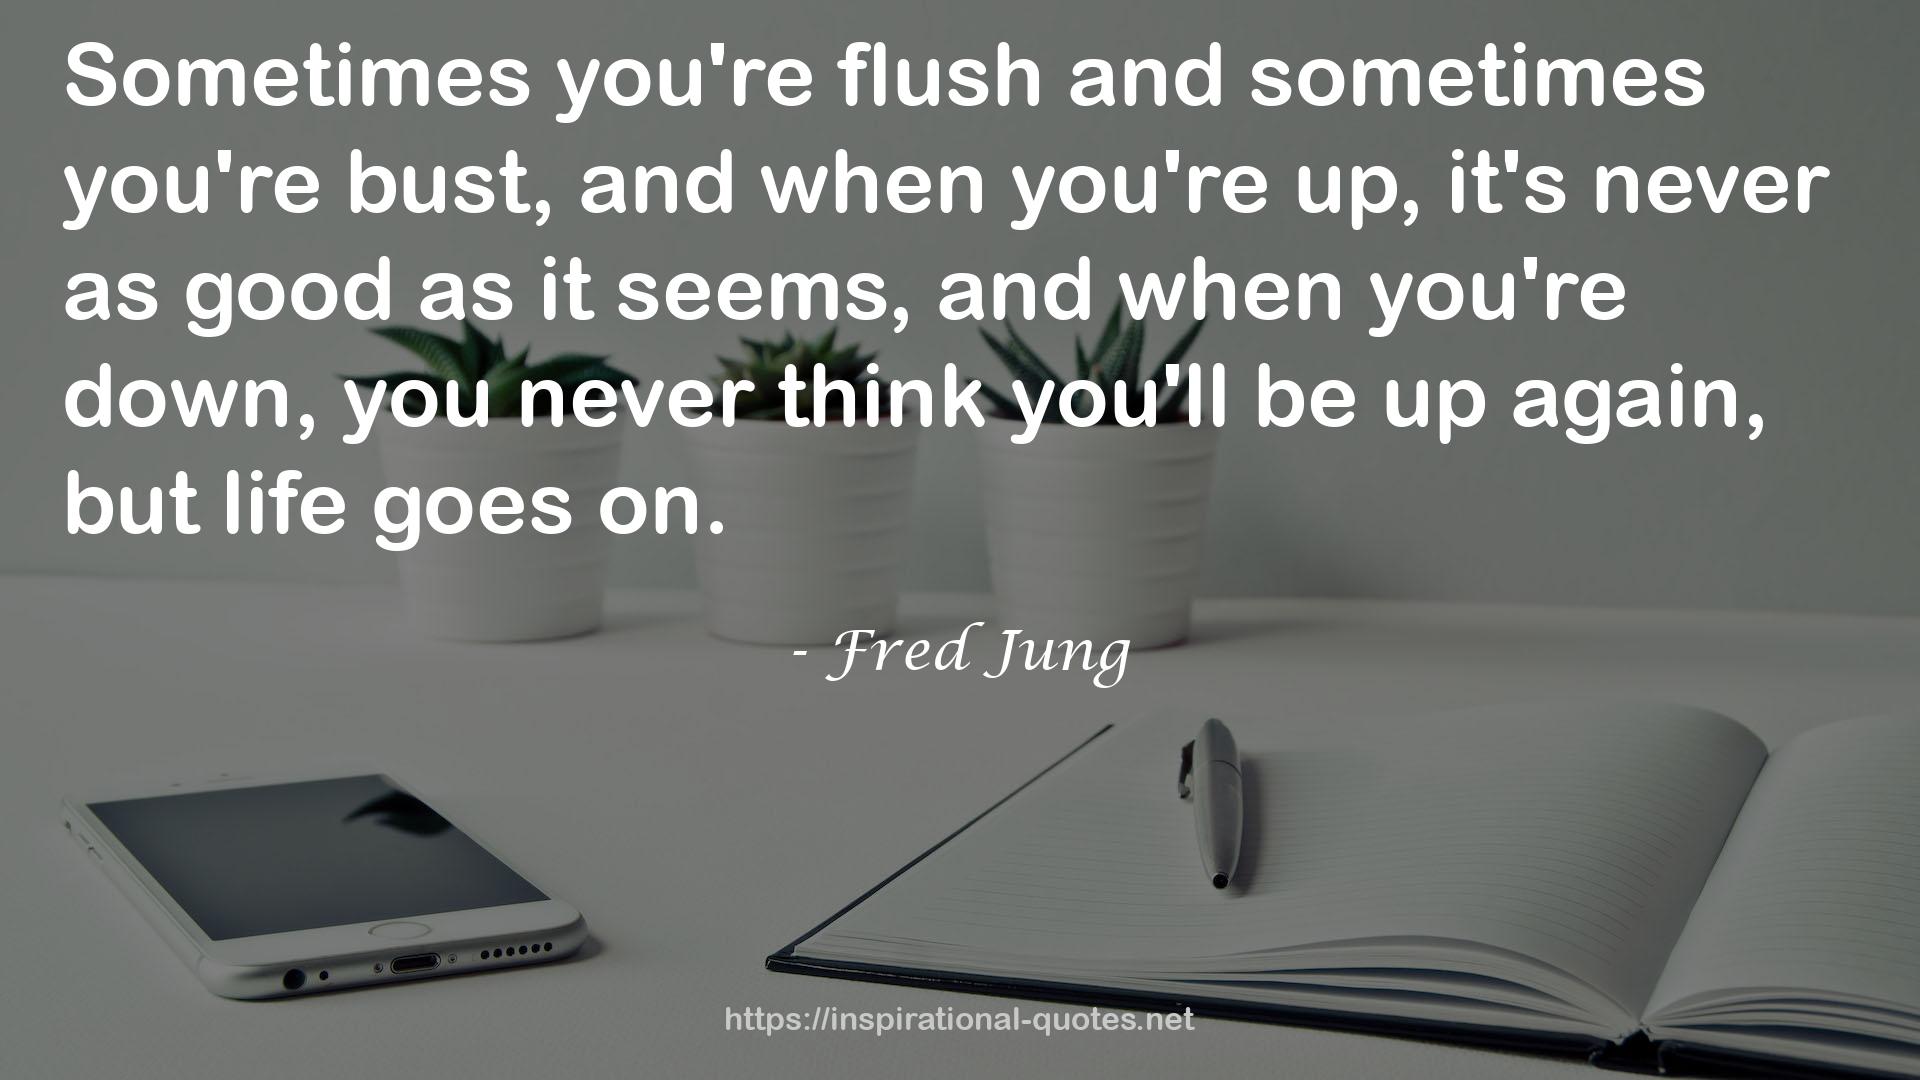 Fred Jung QUOTES